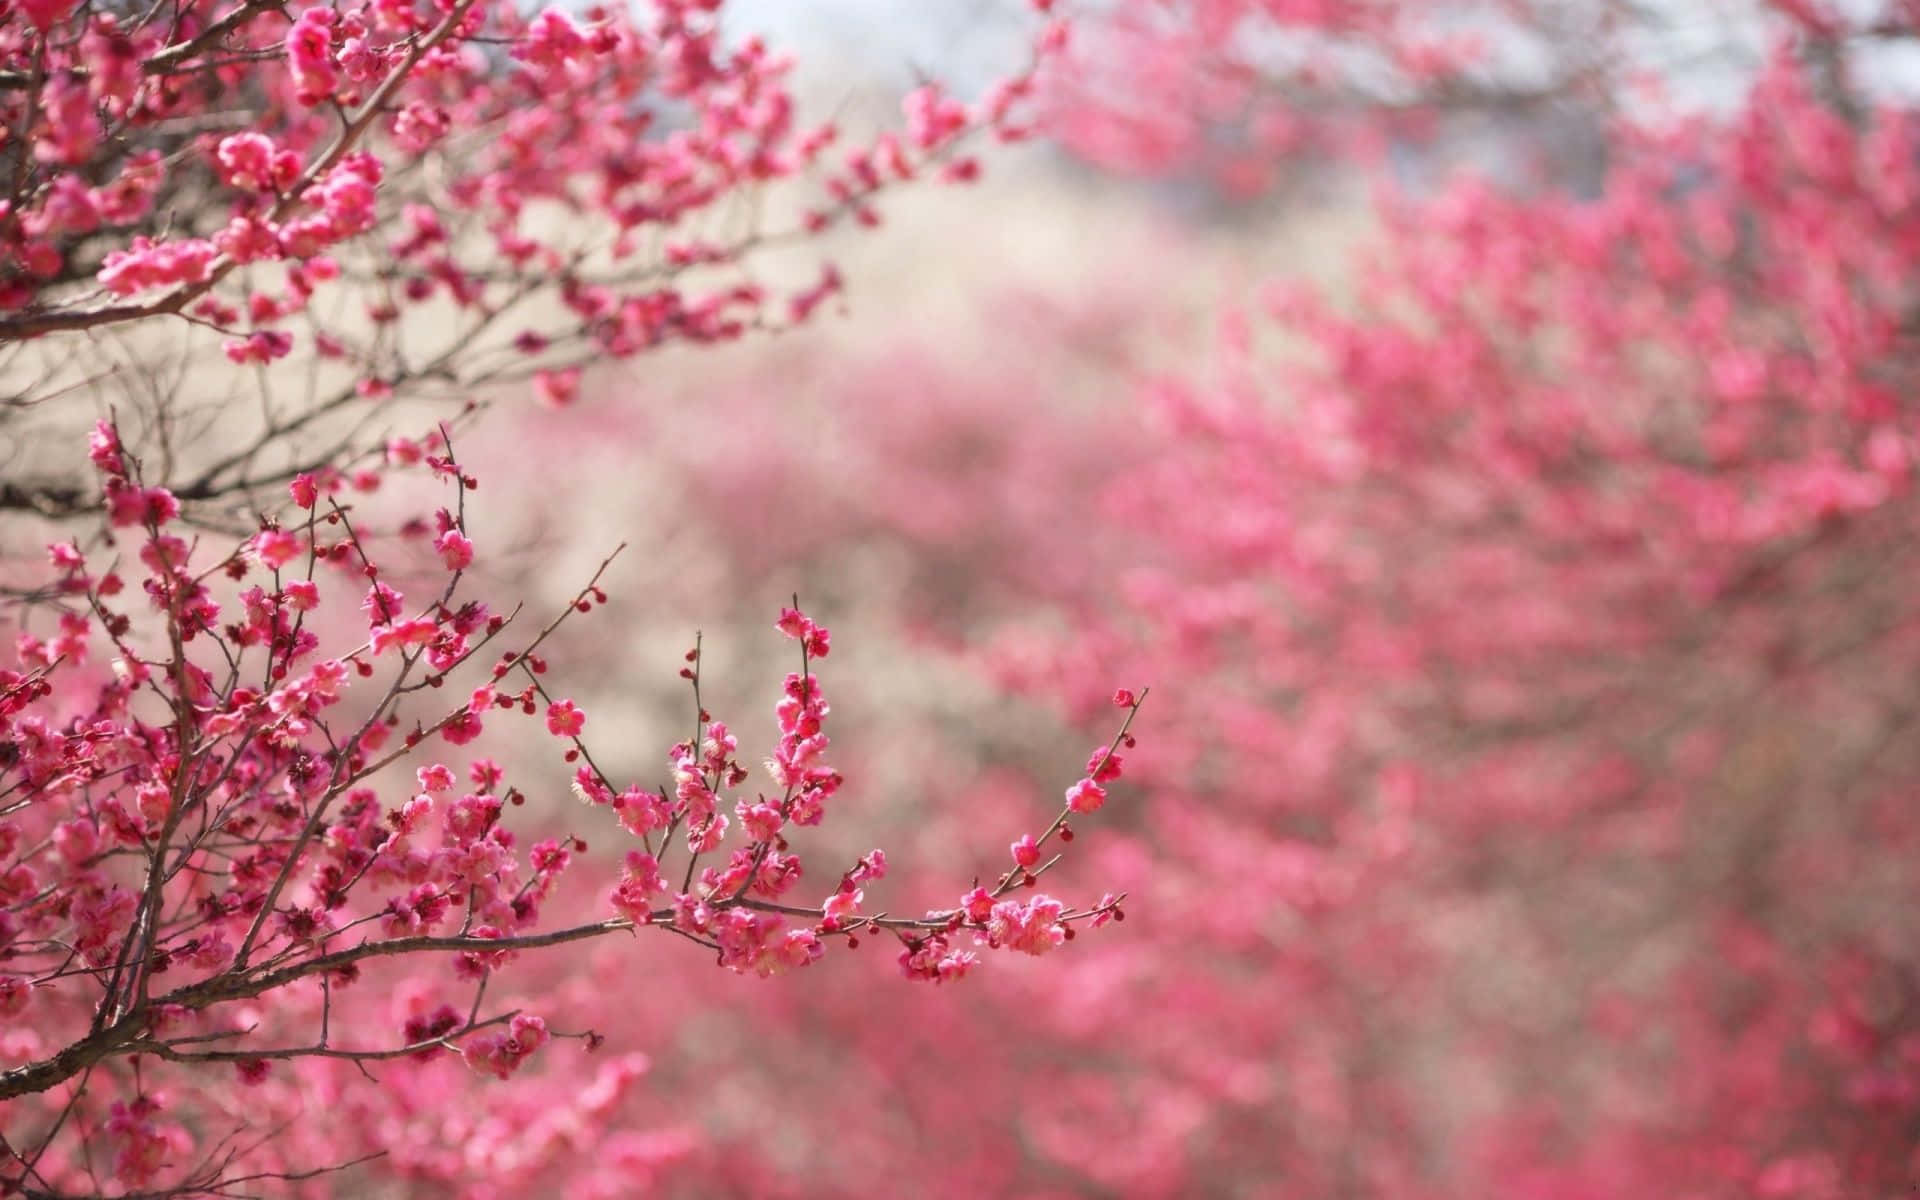 A Pink Tree With Pink Flowers In The Background